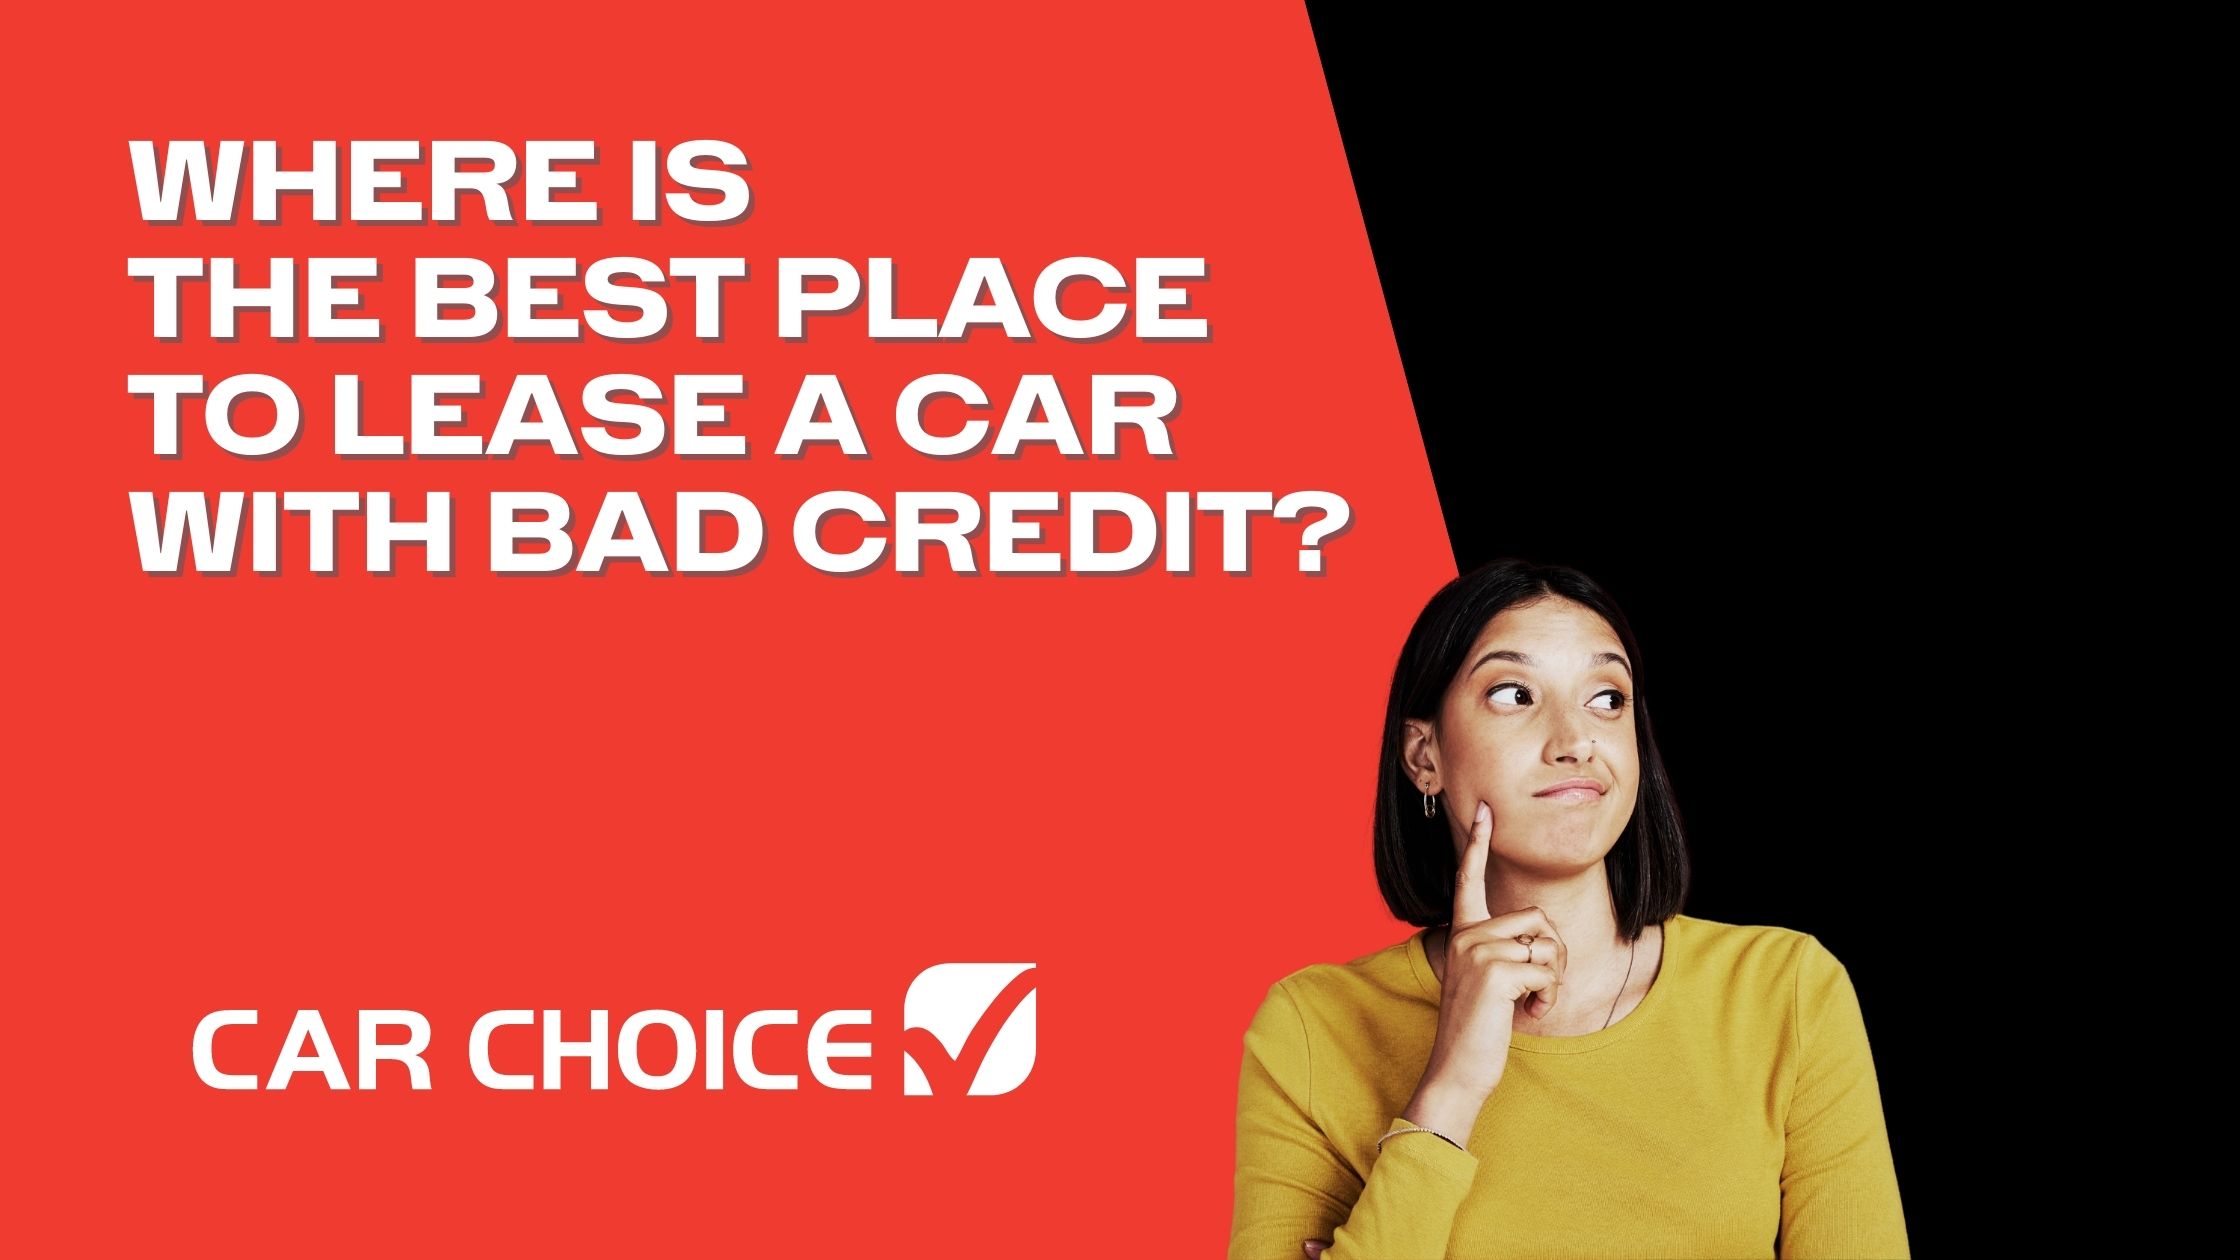 Where is the best place to lease a car with bad credit?